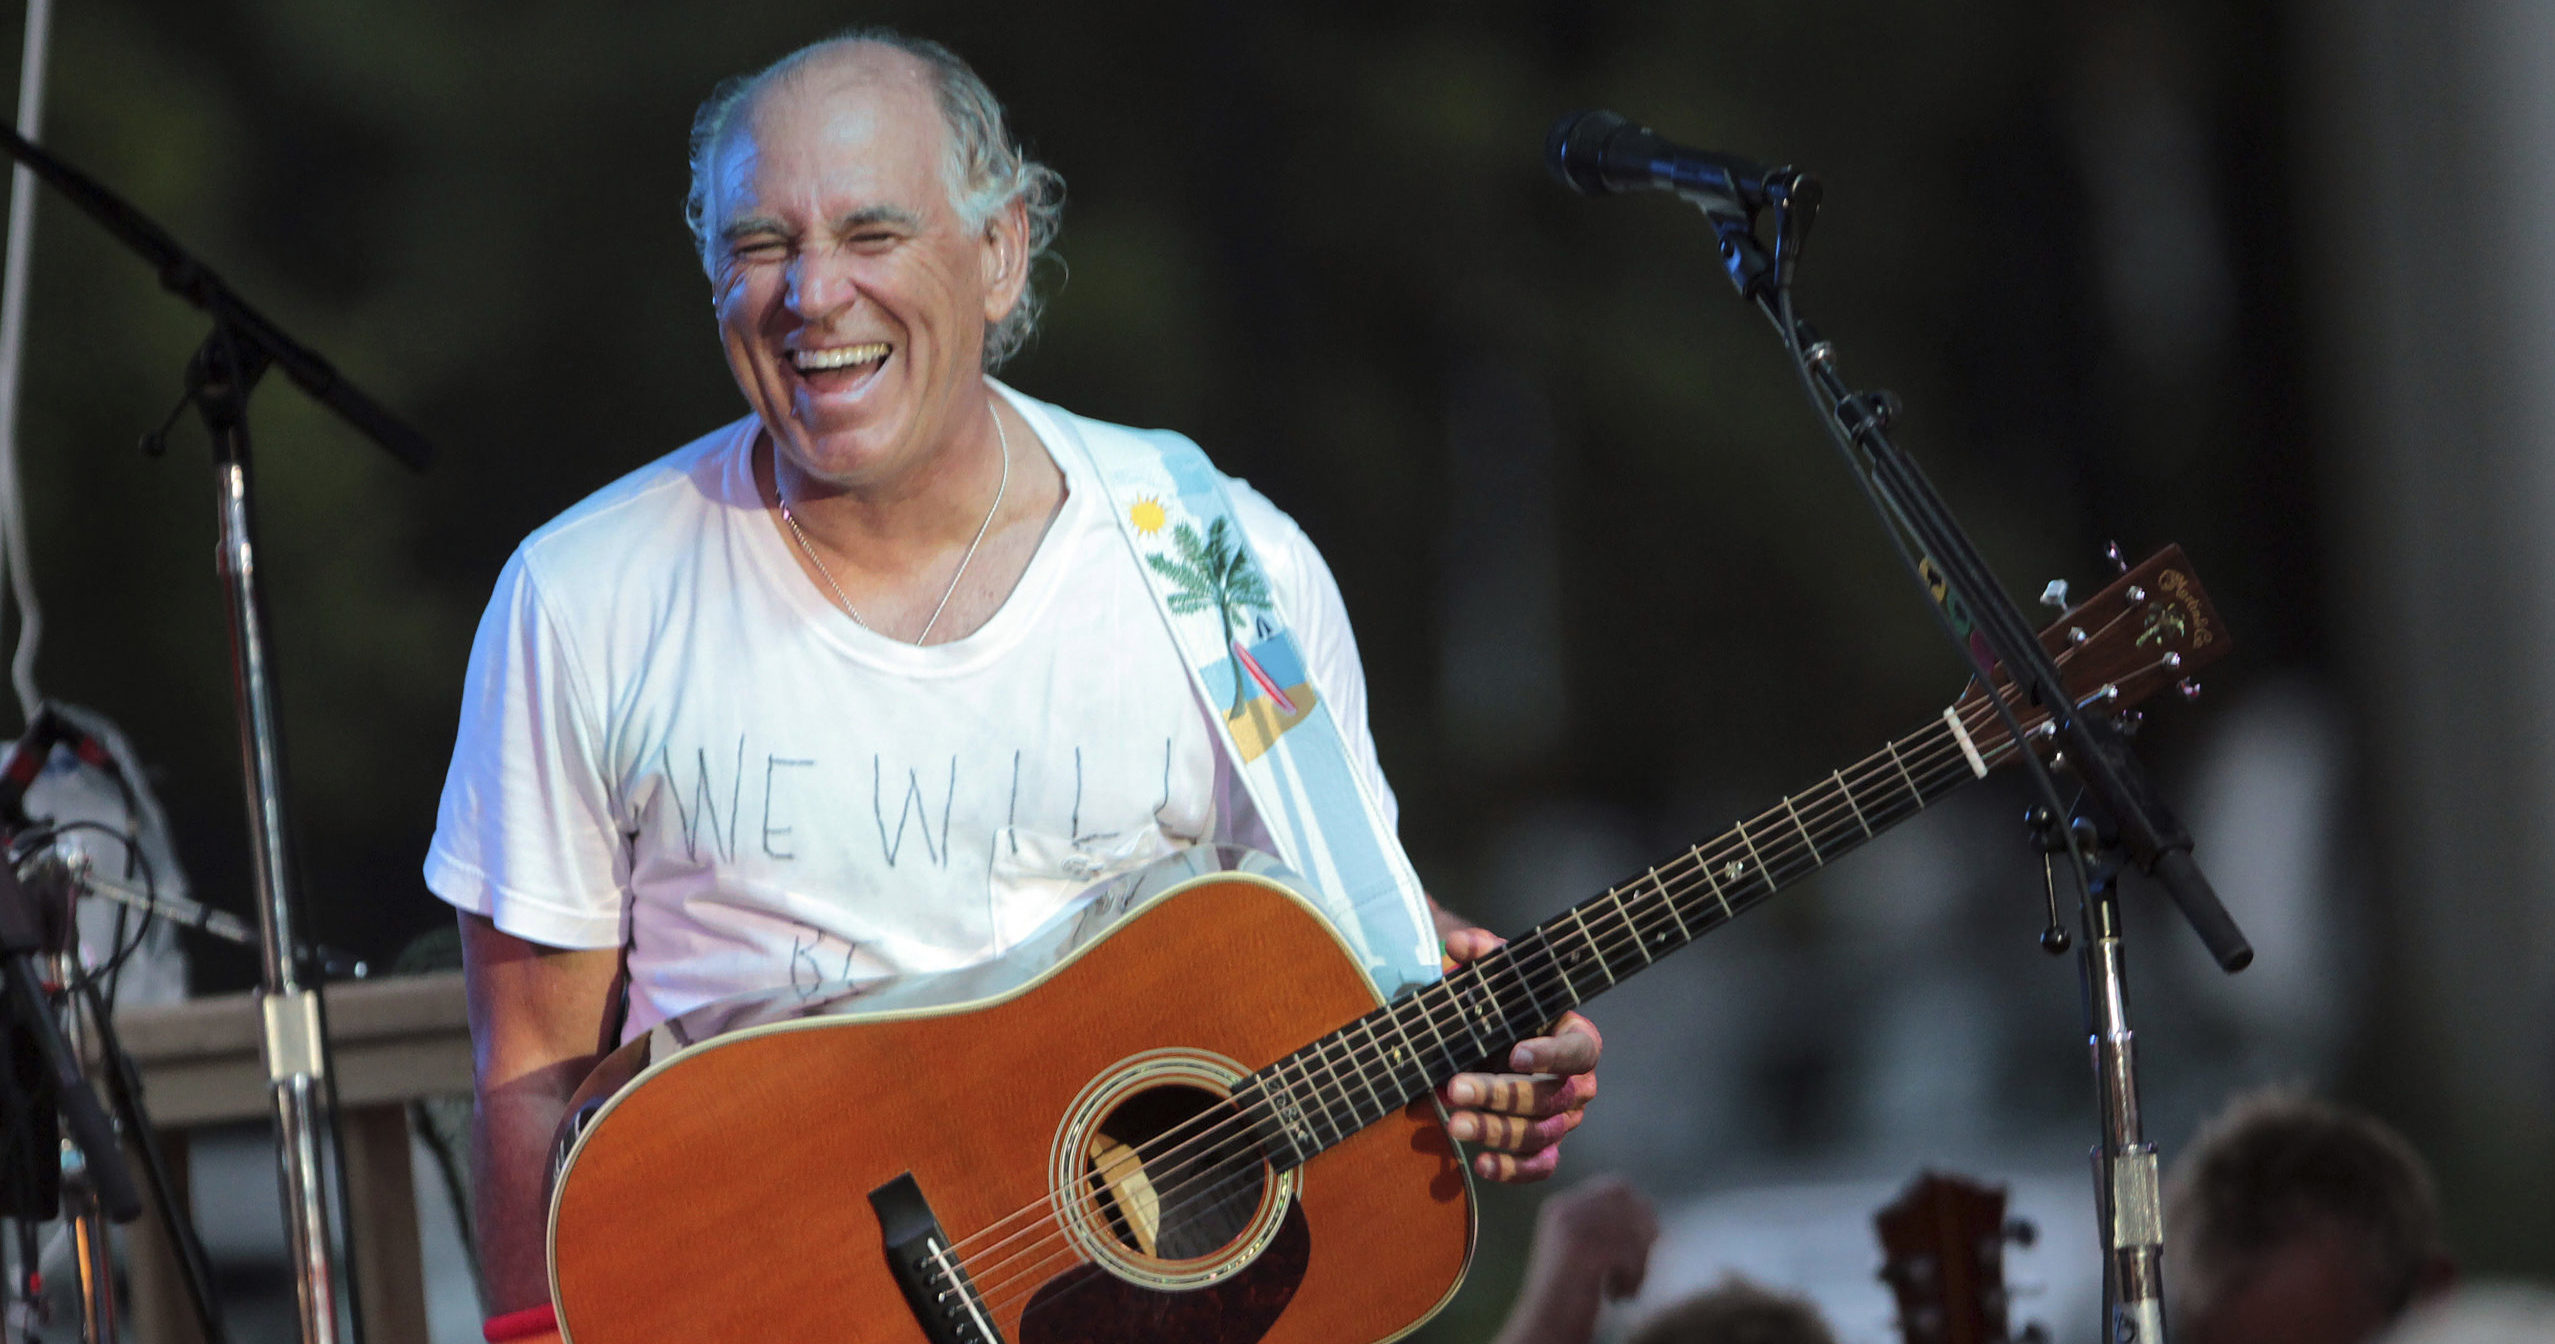 Jimmy Buffett performs at his sister's restaurant in Gulf Shores, Alabama on June 30, 2010.